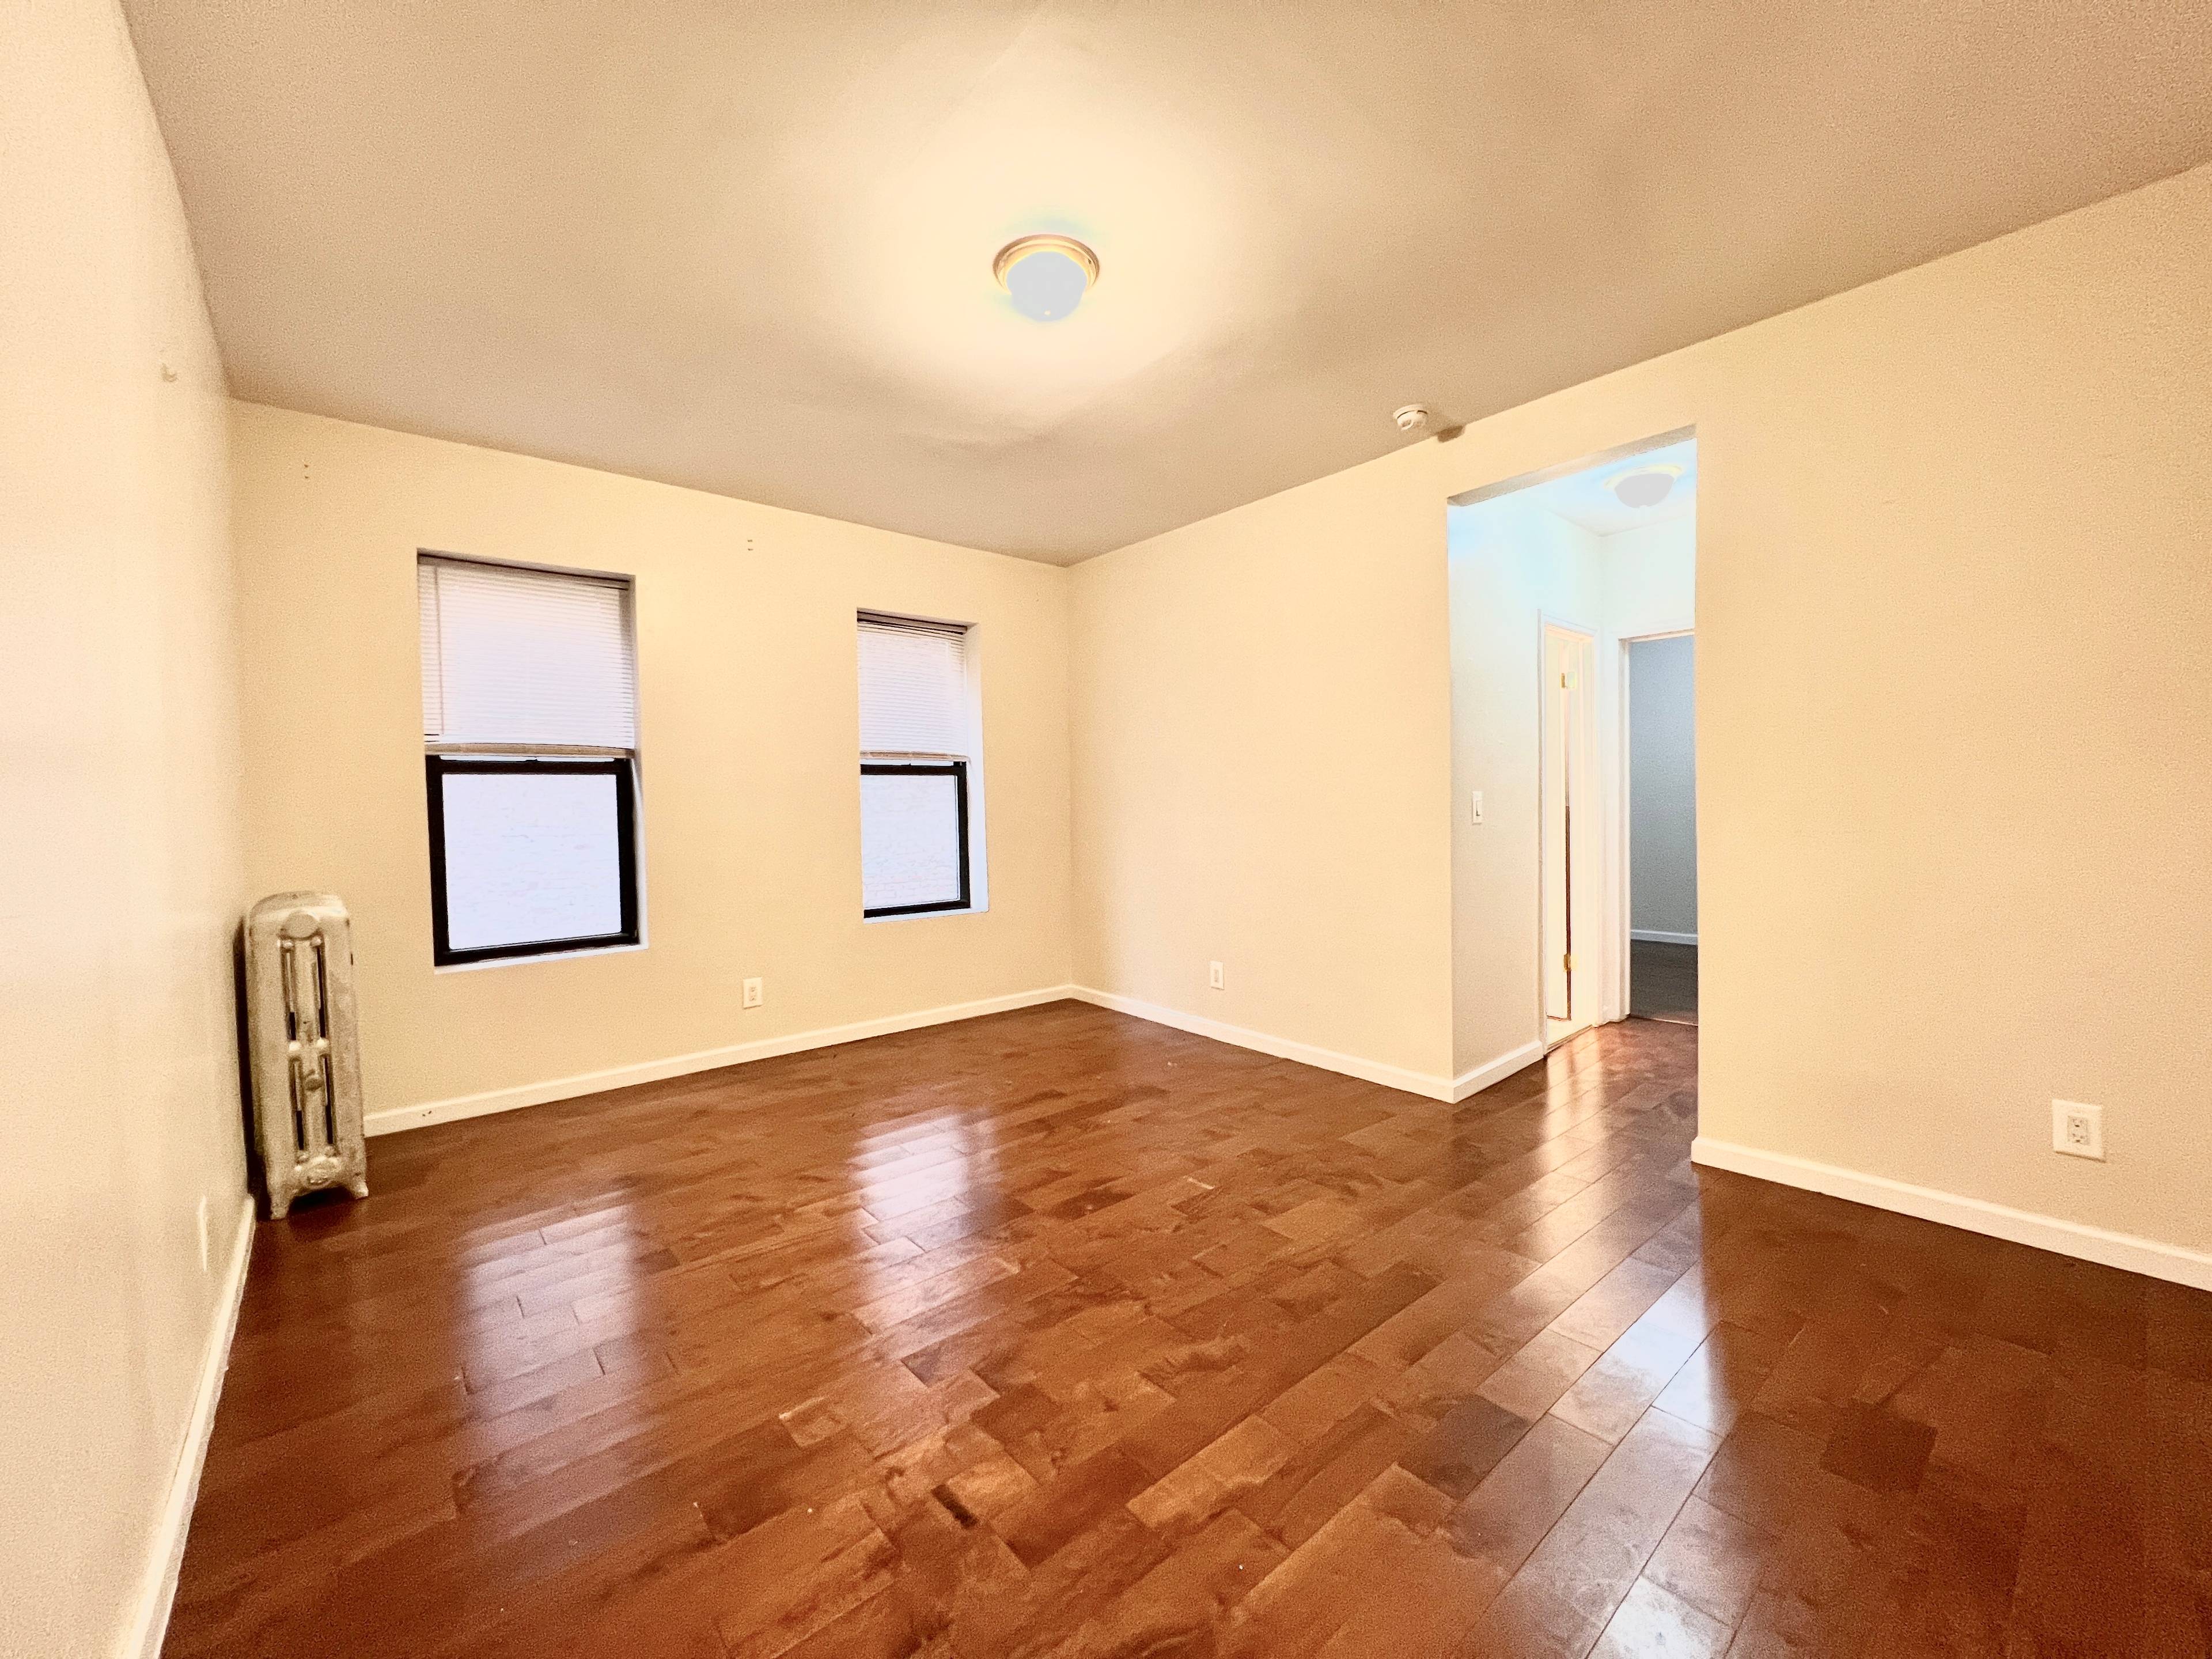 Spacious 3 bedroom in the heart of Washington Heights.